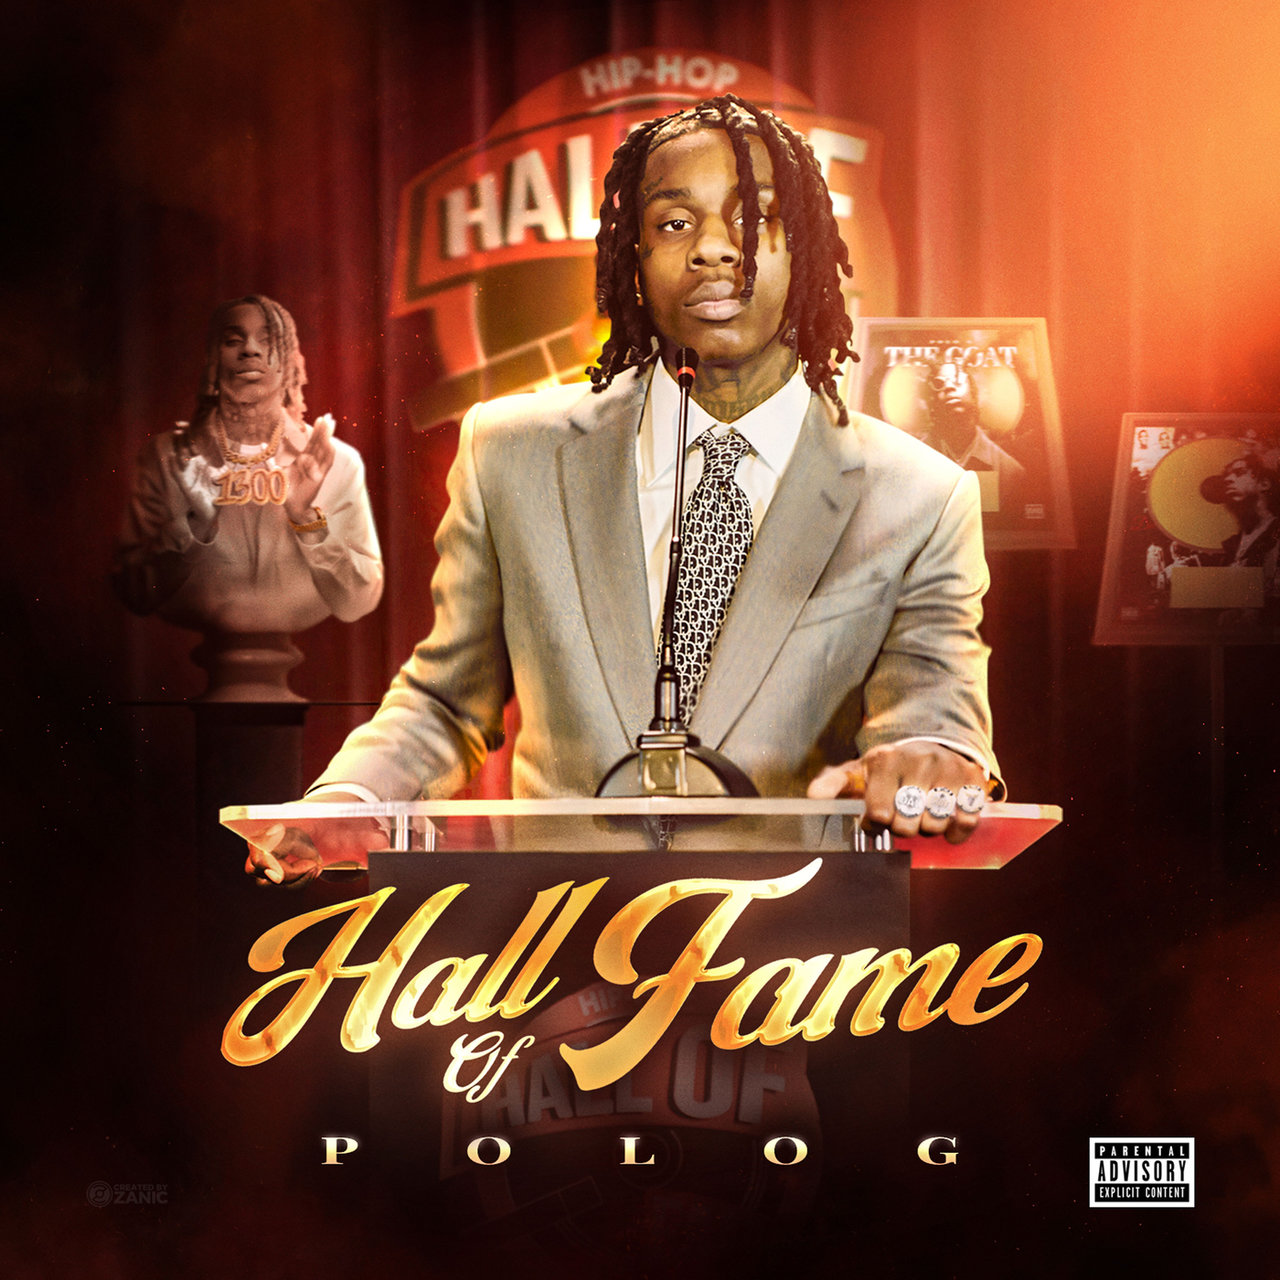 Polo G - Hall Of Fame (Cover)